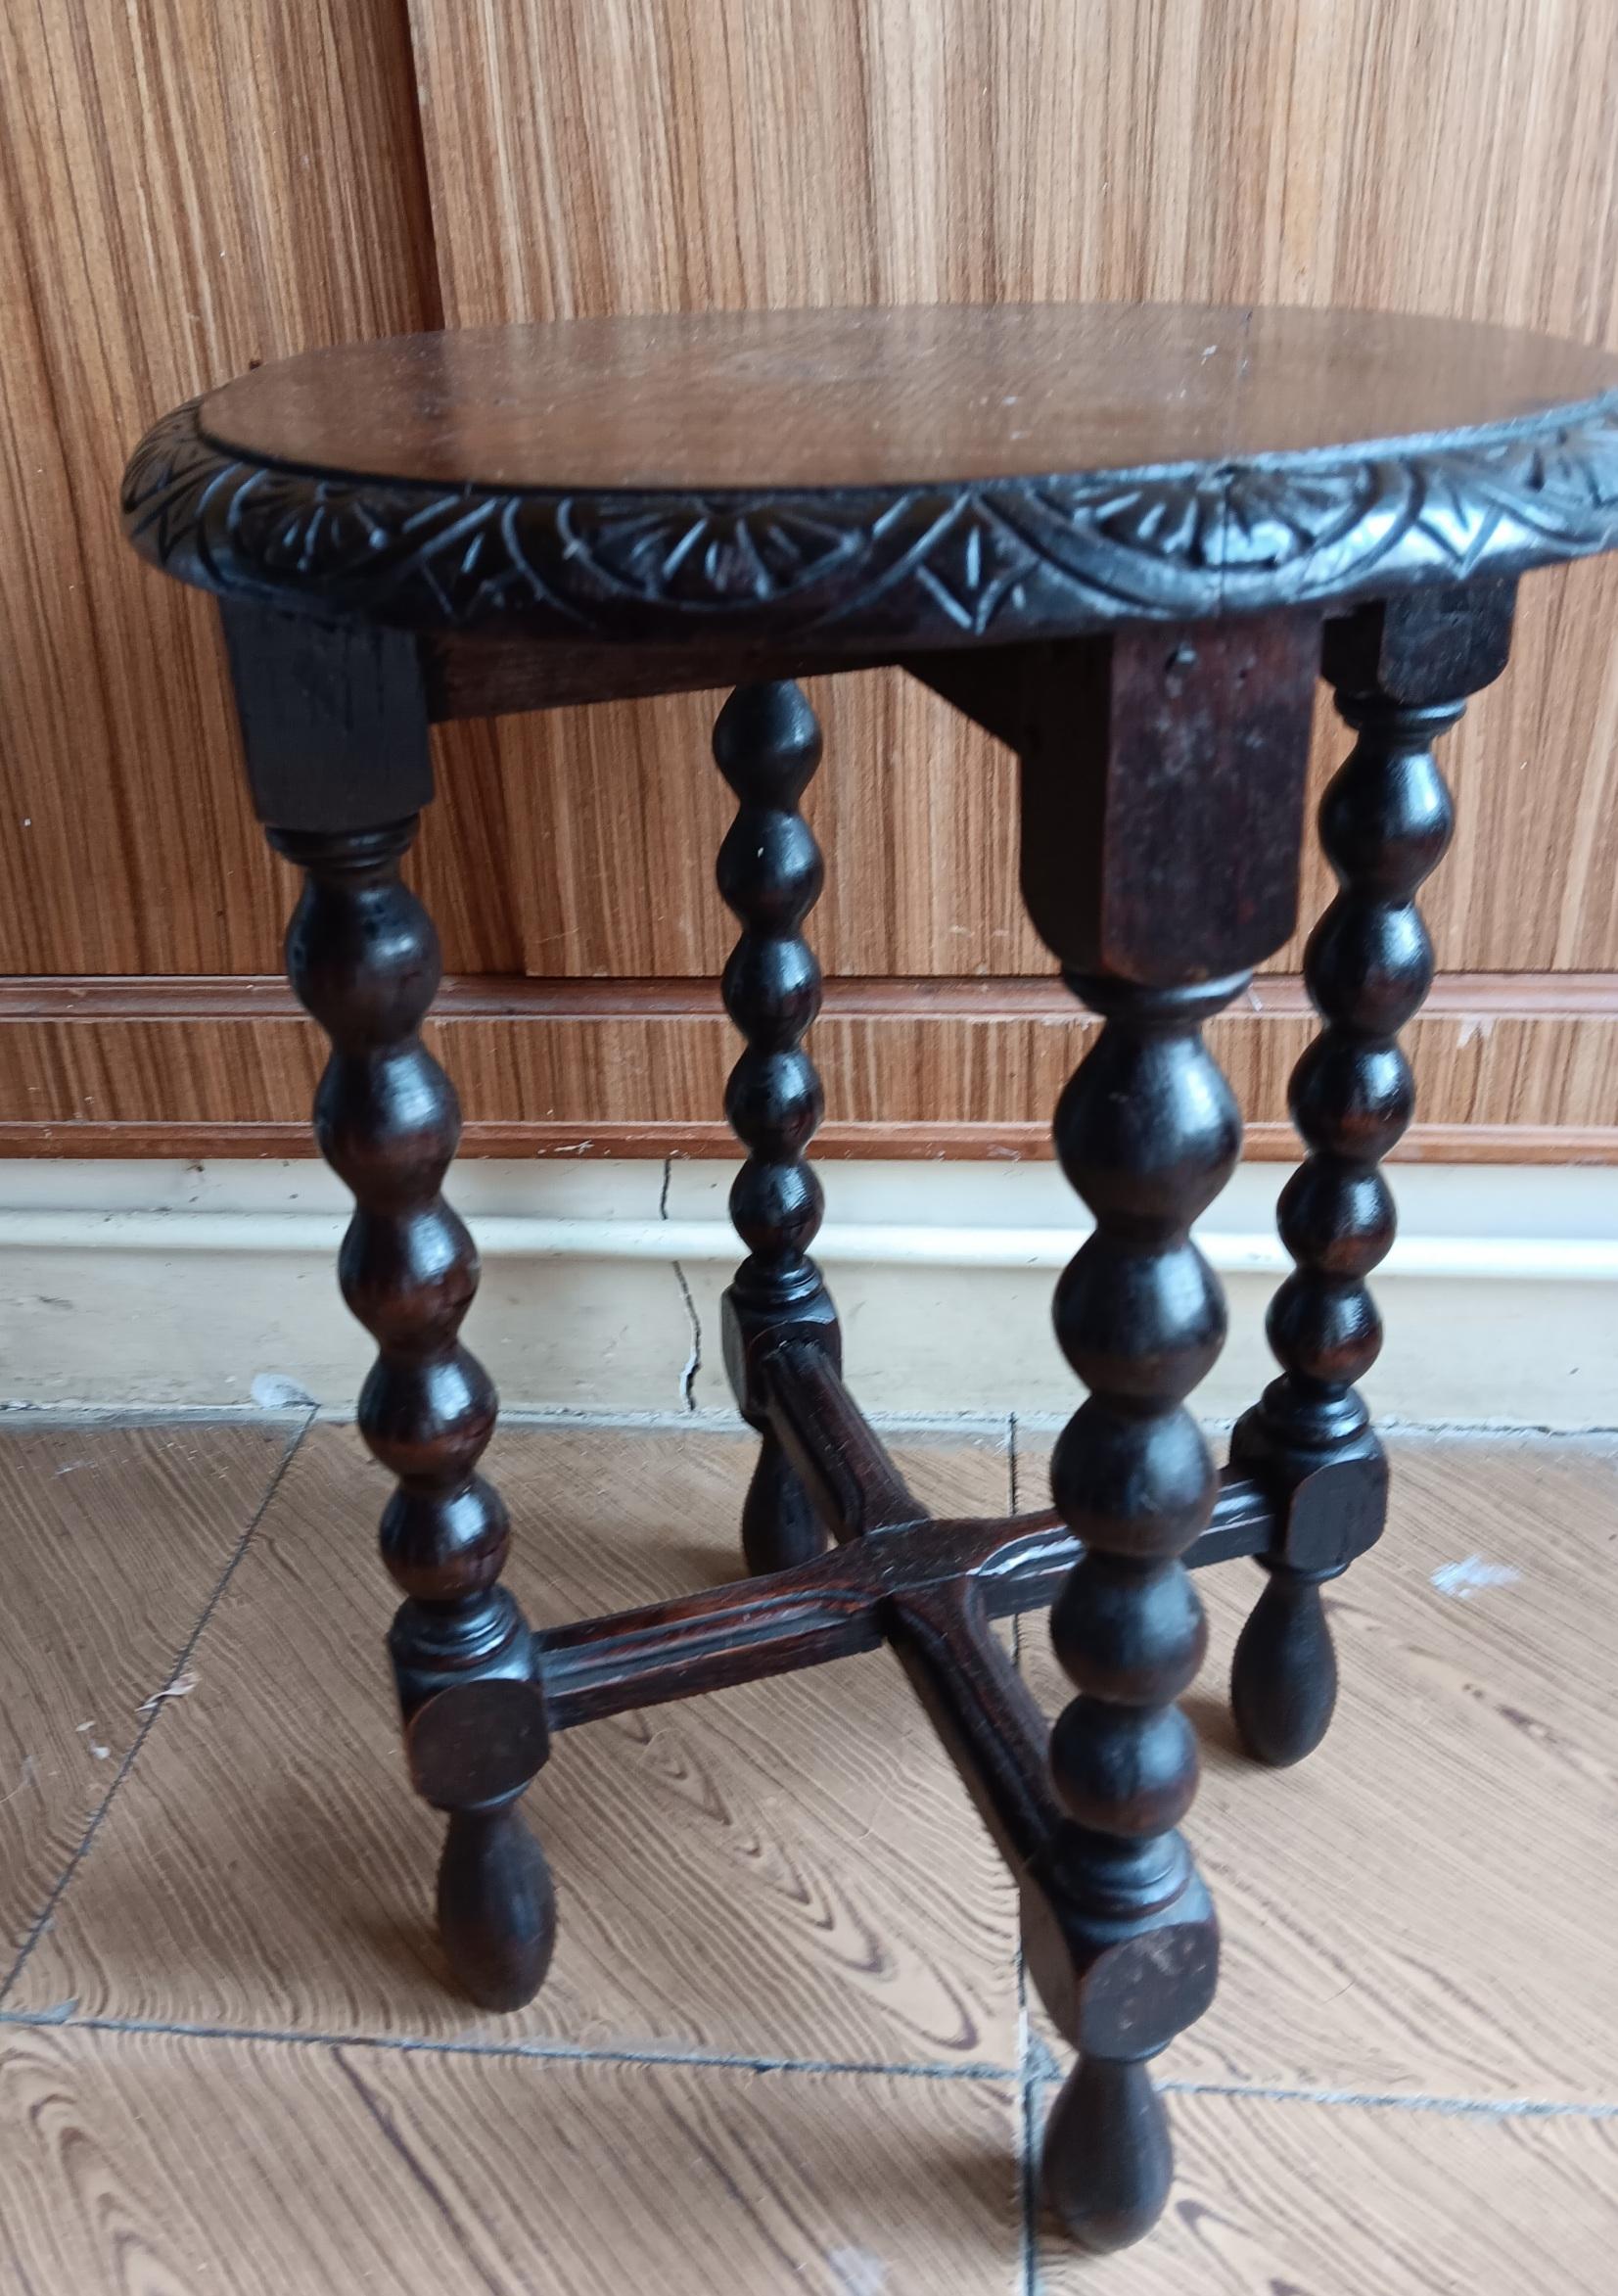 Aesthetic Movement Small Oval Table or Stool Bobbin Turned Legs, 19th Century Spain For Sale